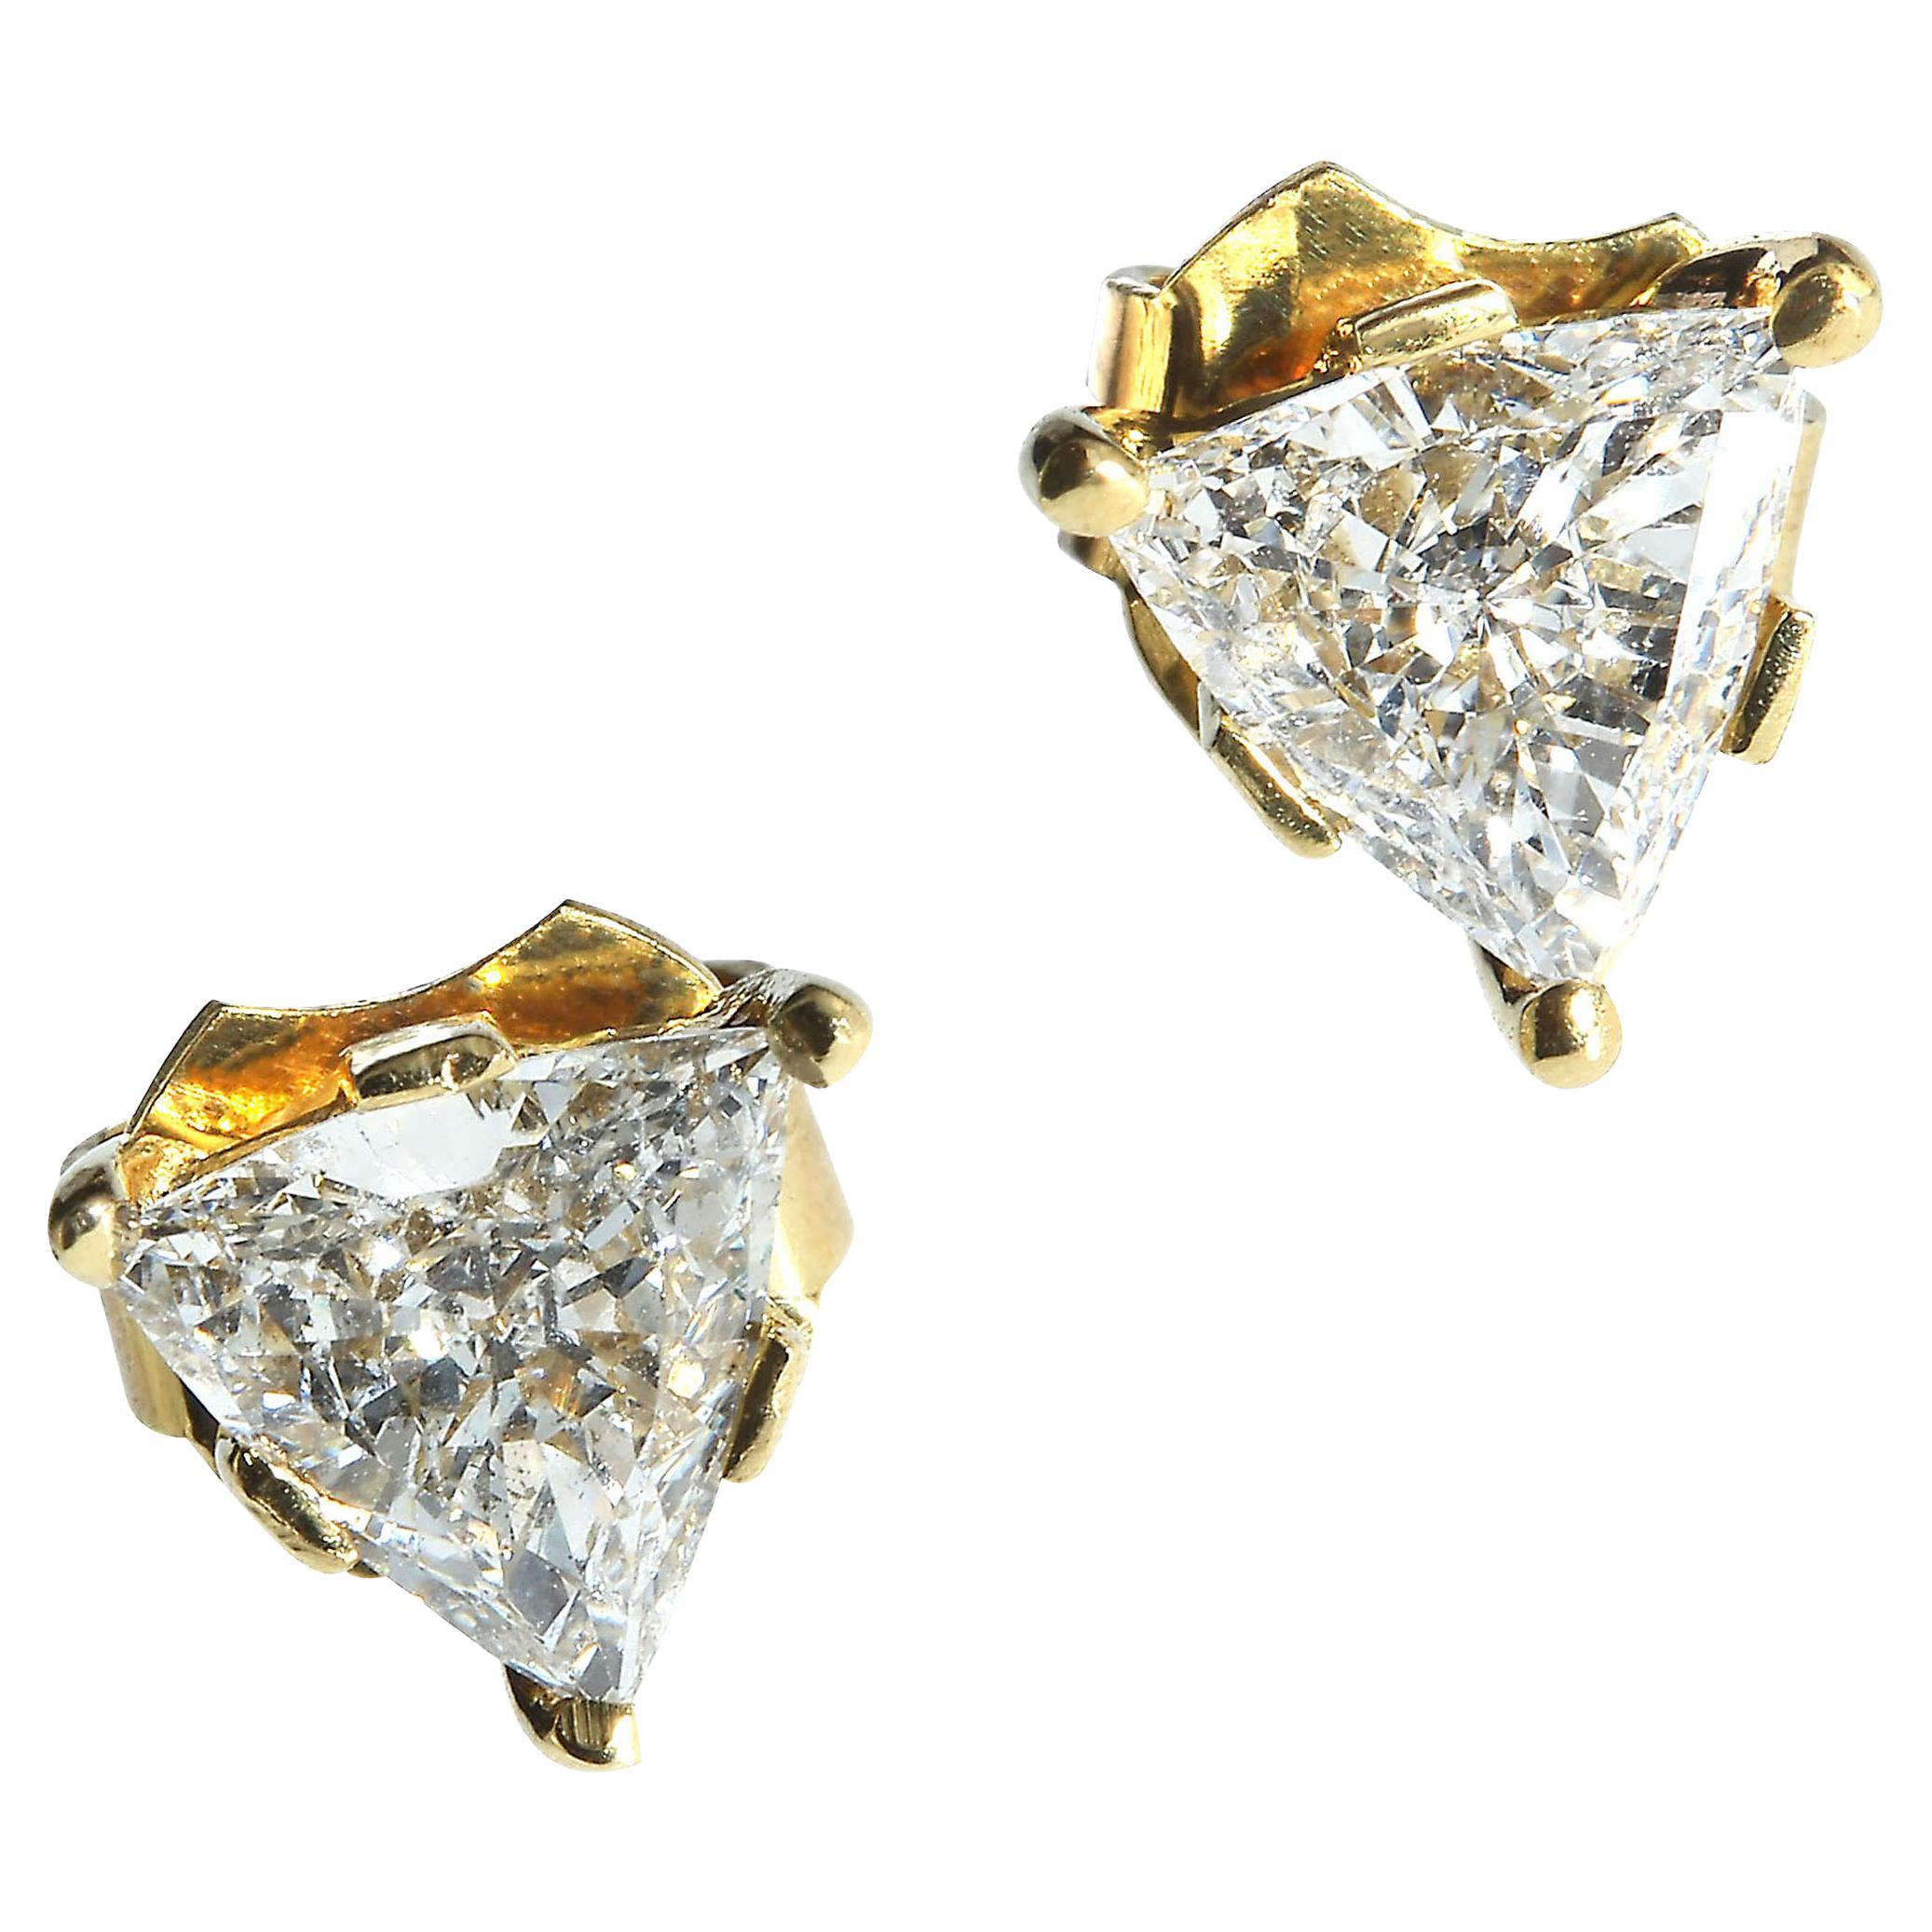 Sparkling, glittering Trillion Diamond Stud earring of approximately 1.25 carat total weight.  These gorgeous Diamonds are set in 18K yellow gold and have friction backs.  They are the perfect size to put on in the morning and wear all day and all